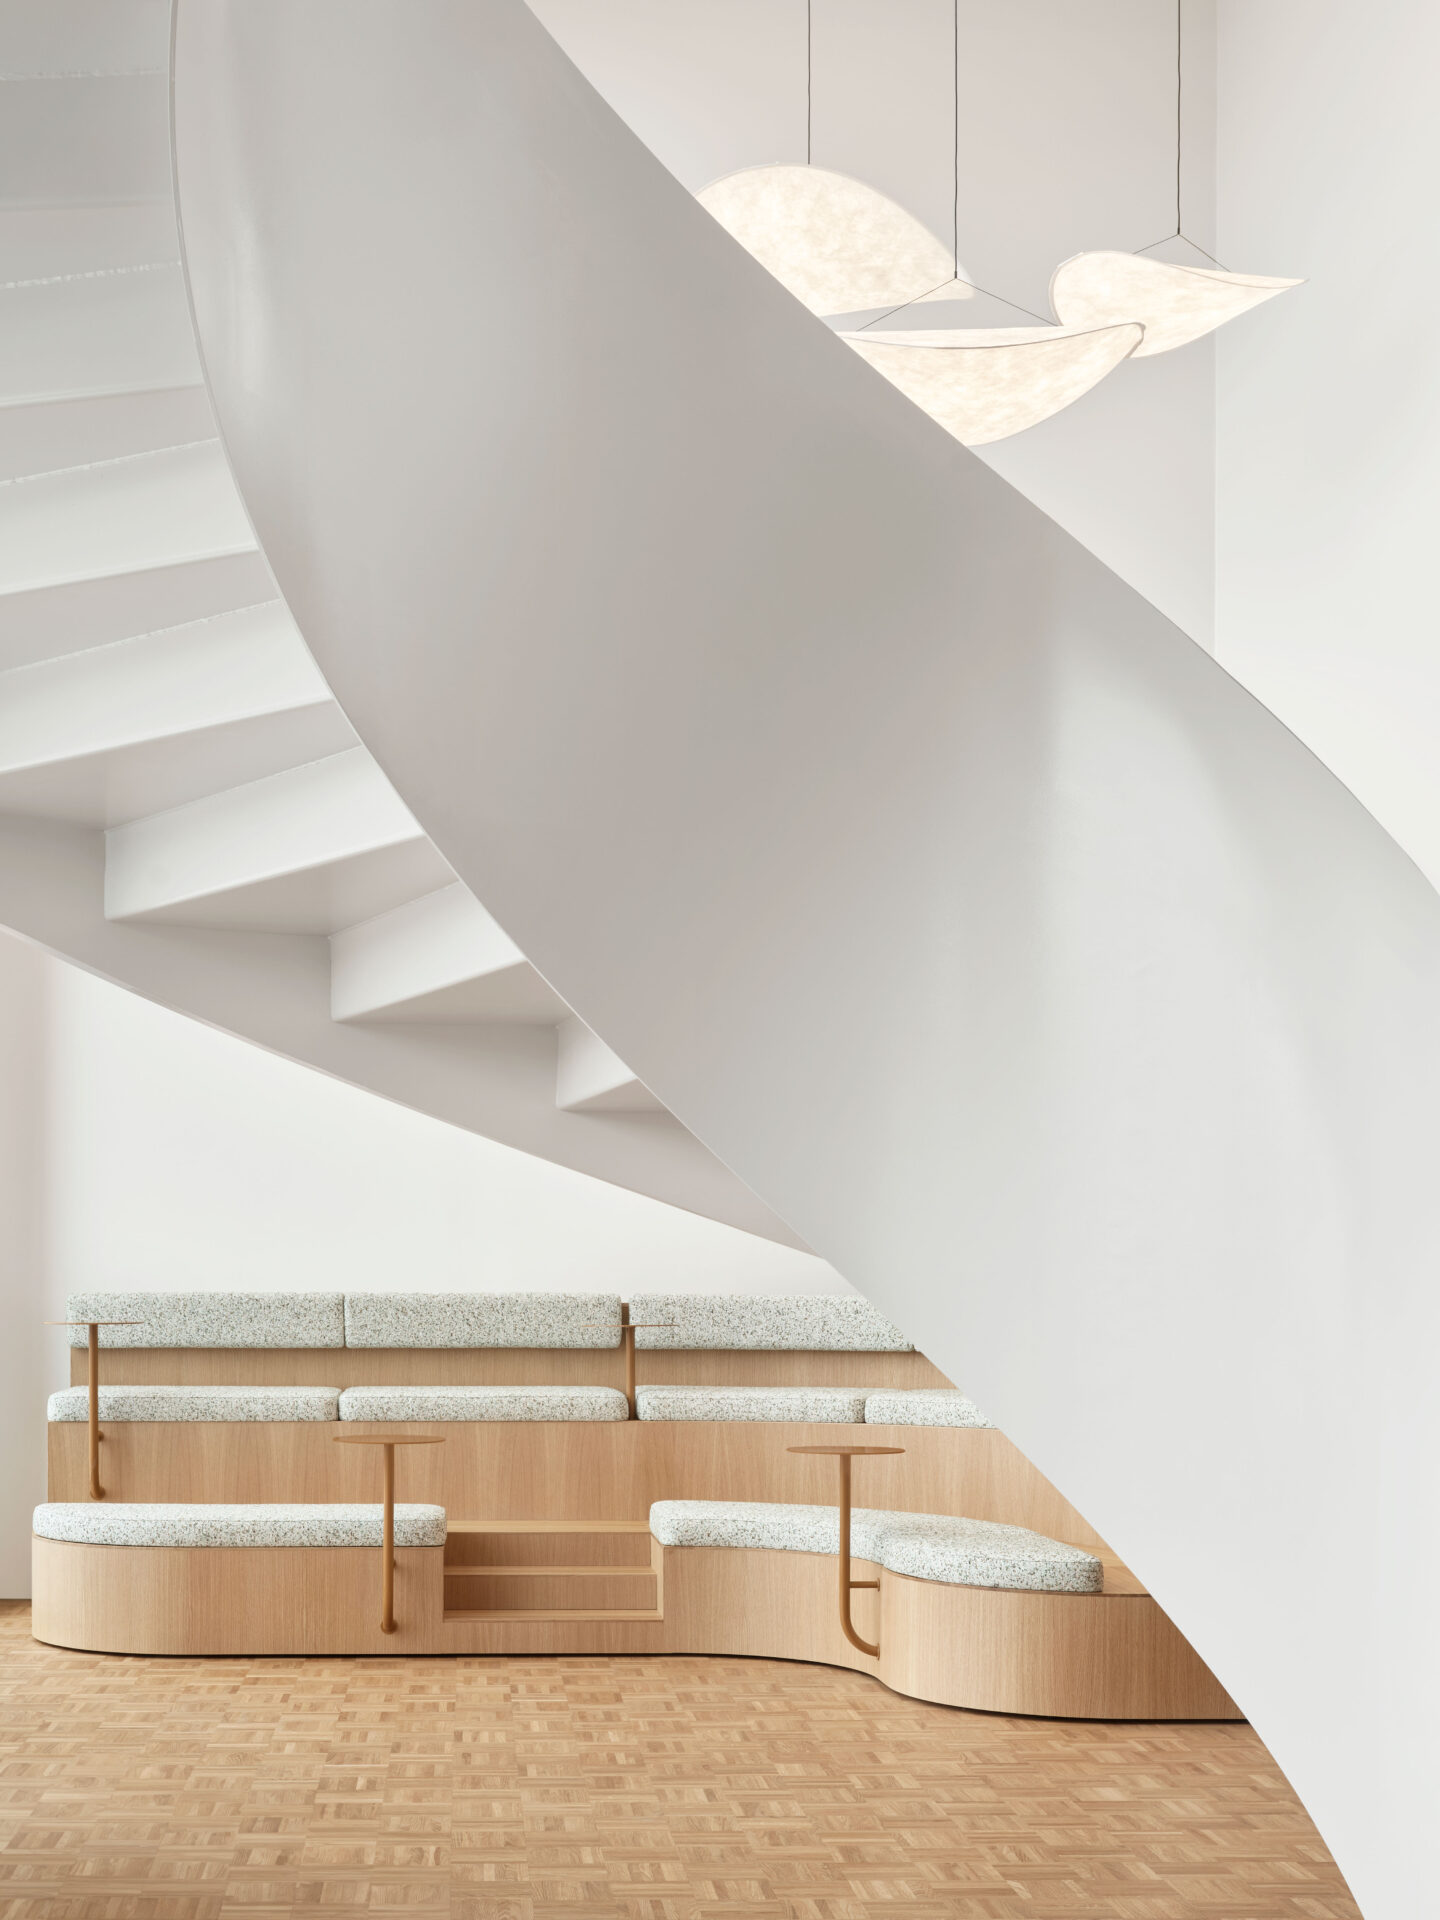 elegant white spiral staircase in front of a wooden bench with light upholstery and small side tables, modern office design